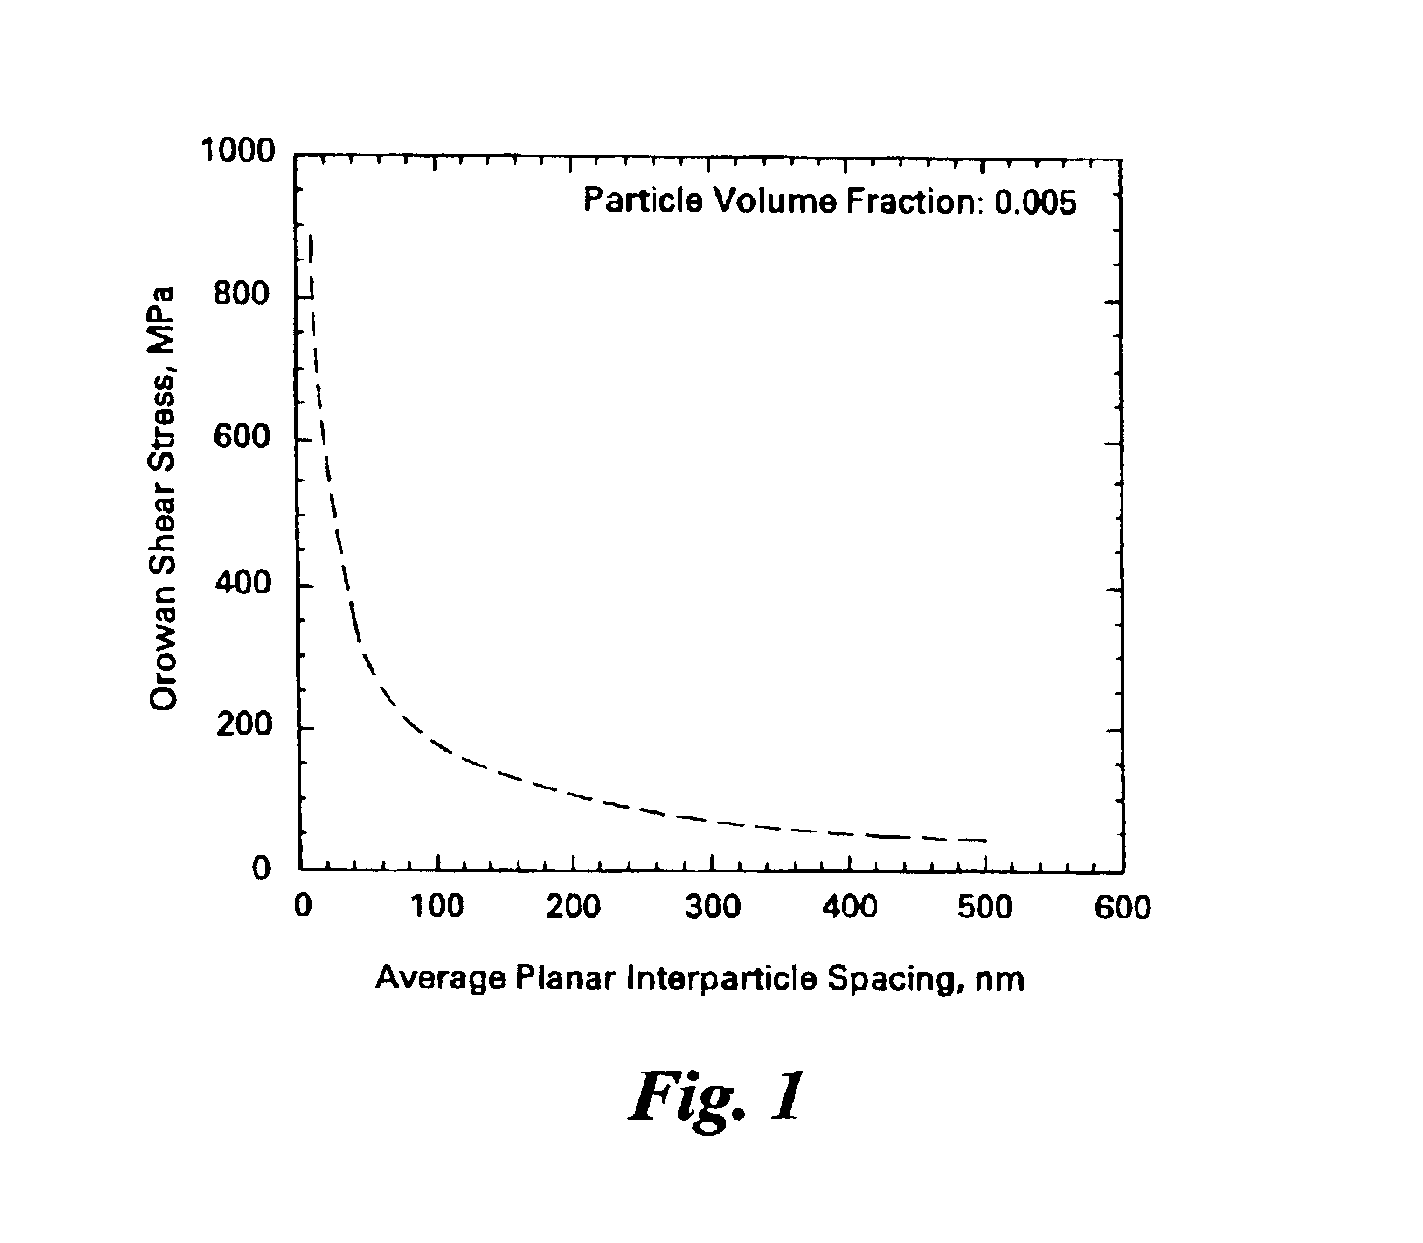 Method for making materials having artificially dispersed nano-size phases and articles made therewith